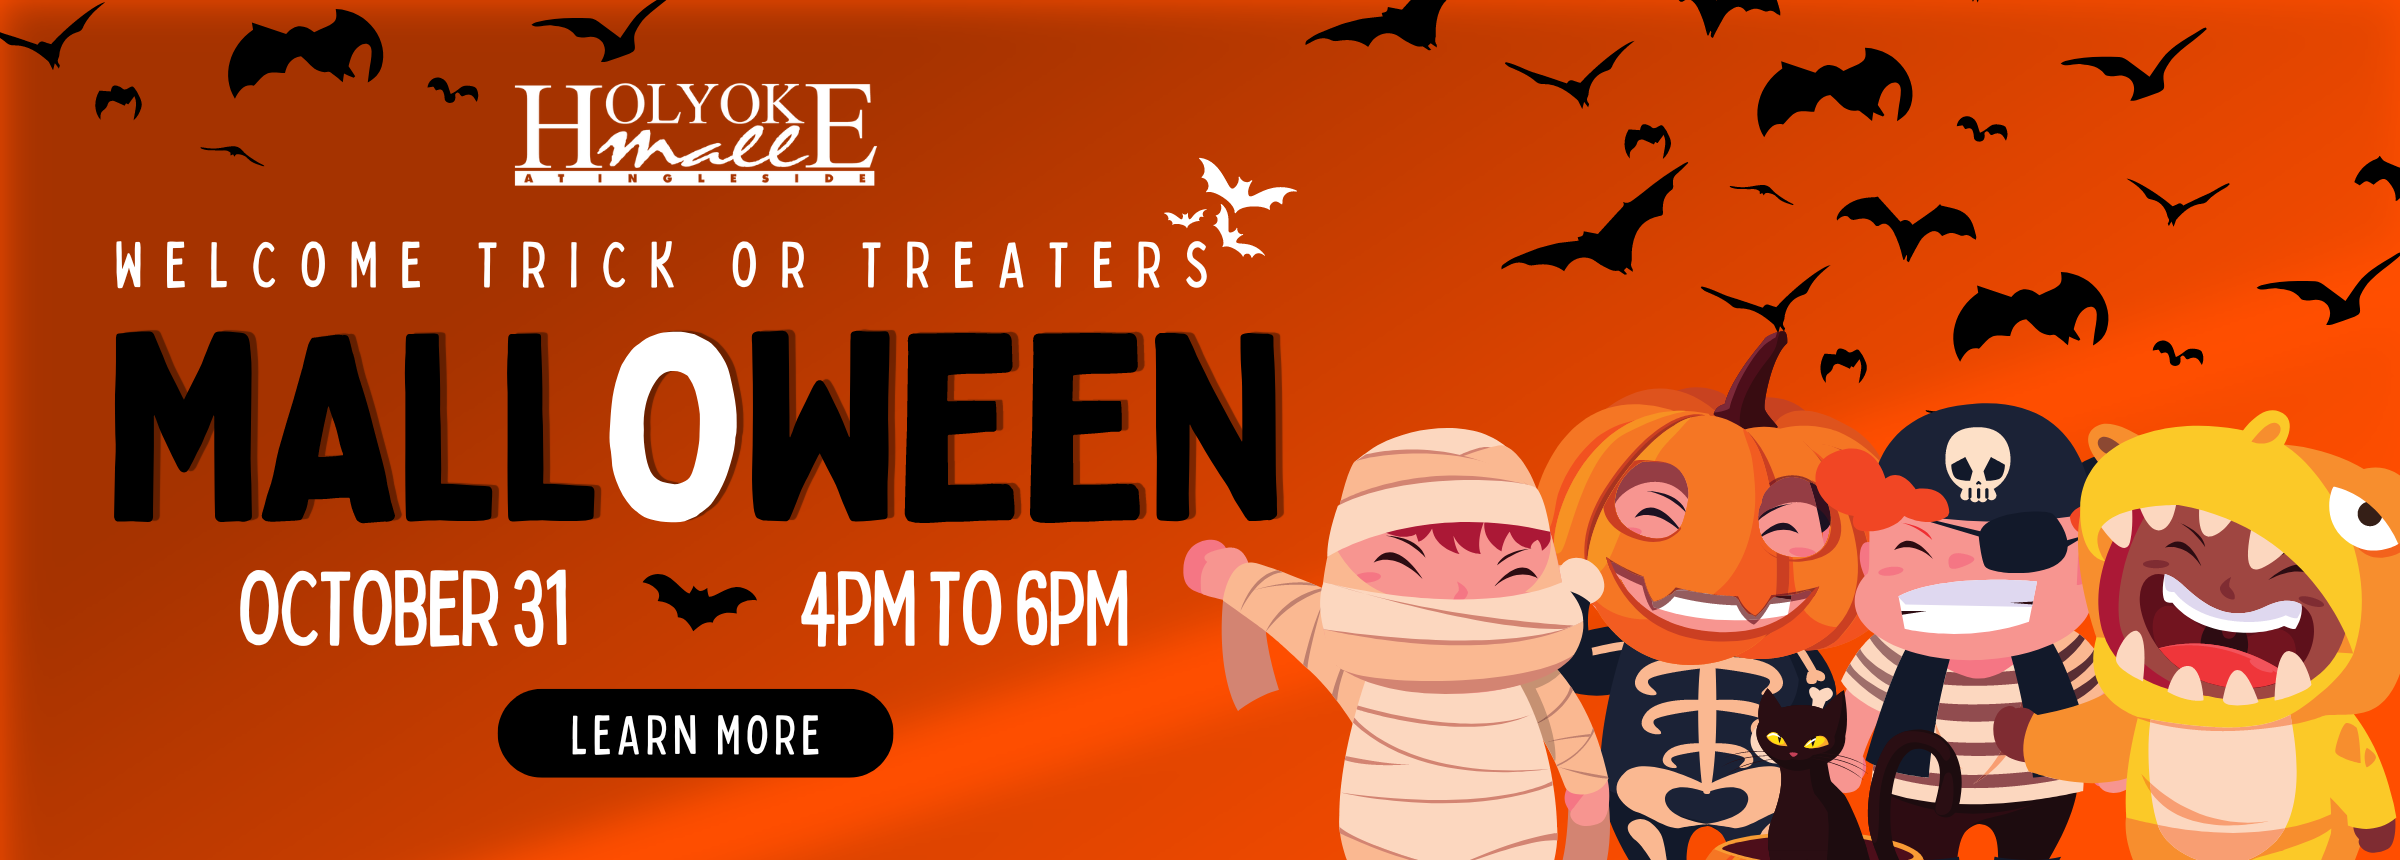 Welcome trick or treaters. Malloween is on October 31 from 4-6PM. Click for more information.